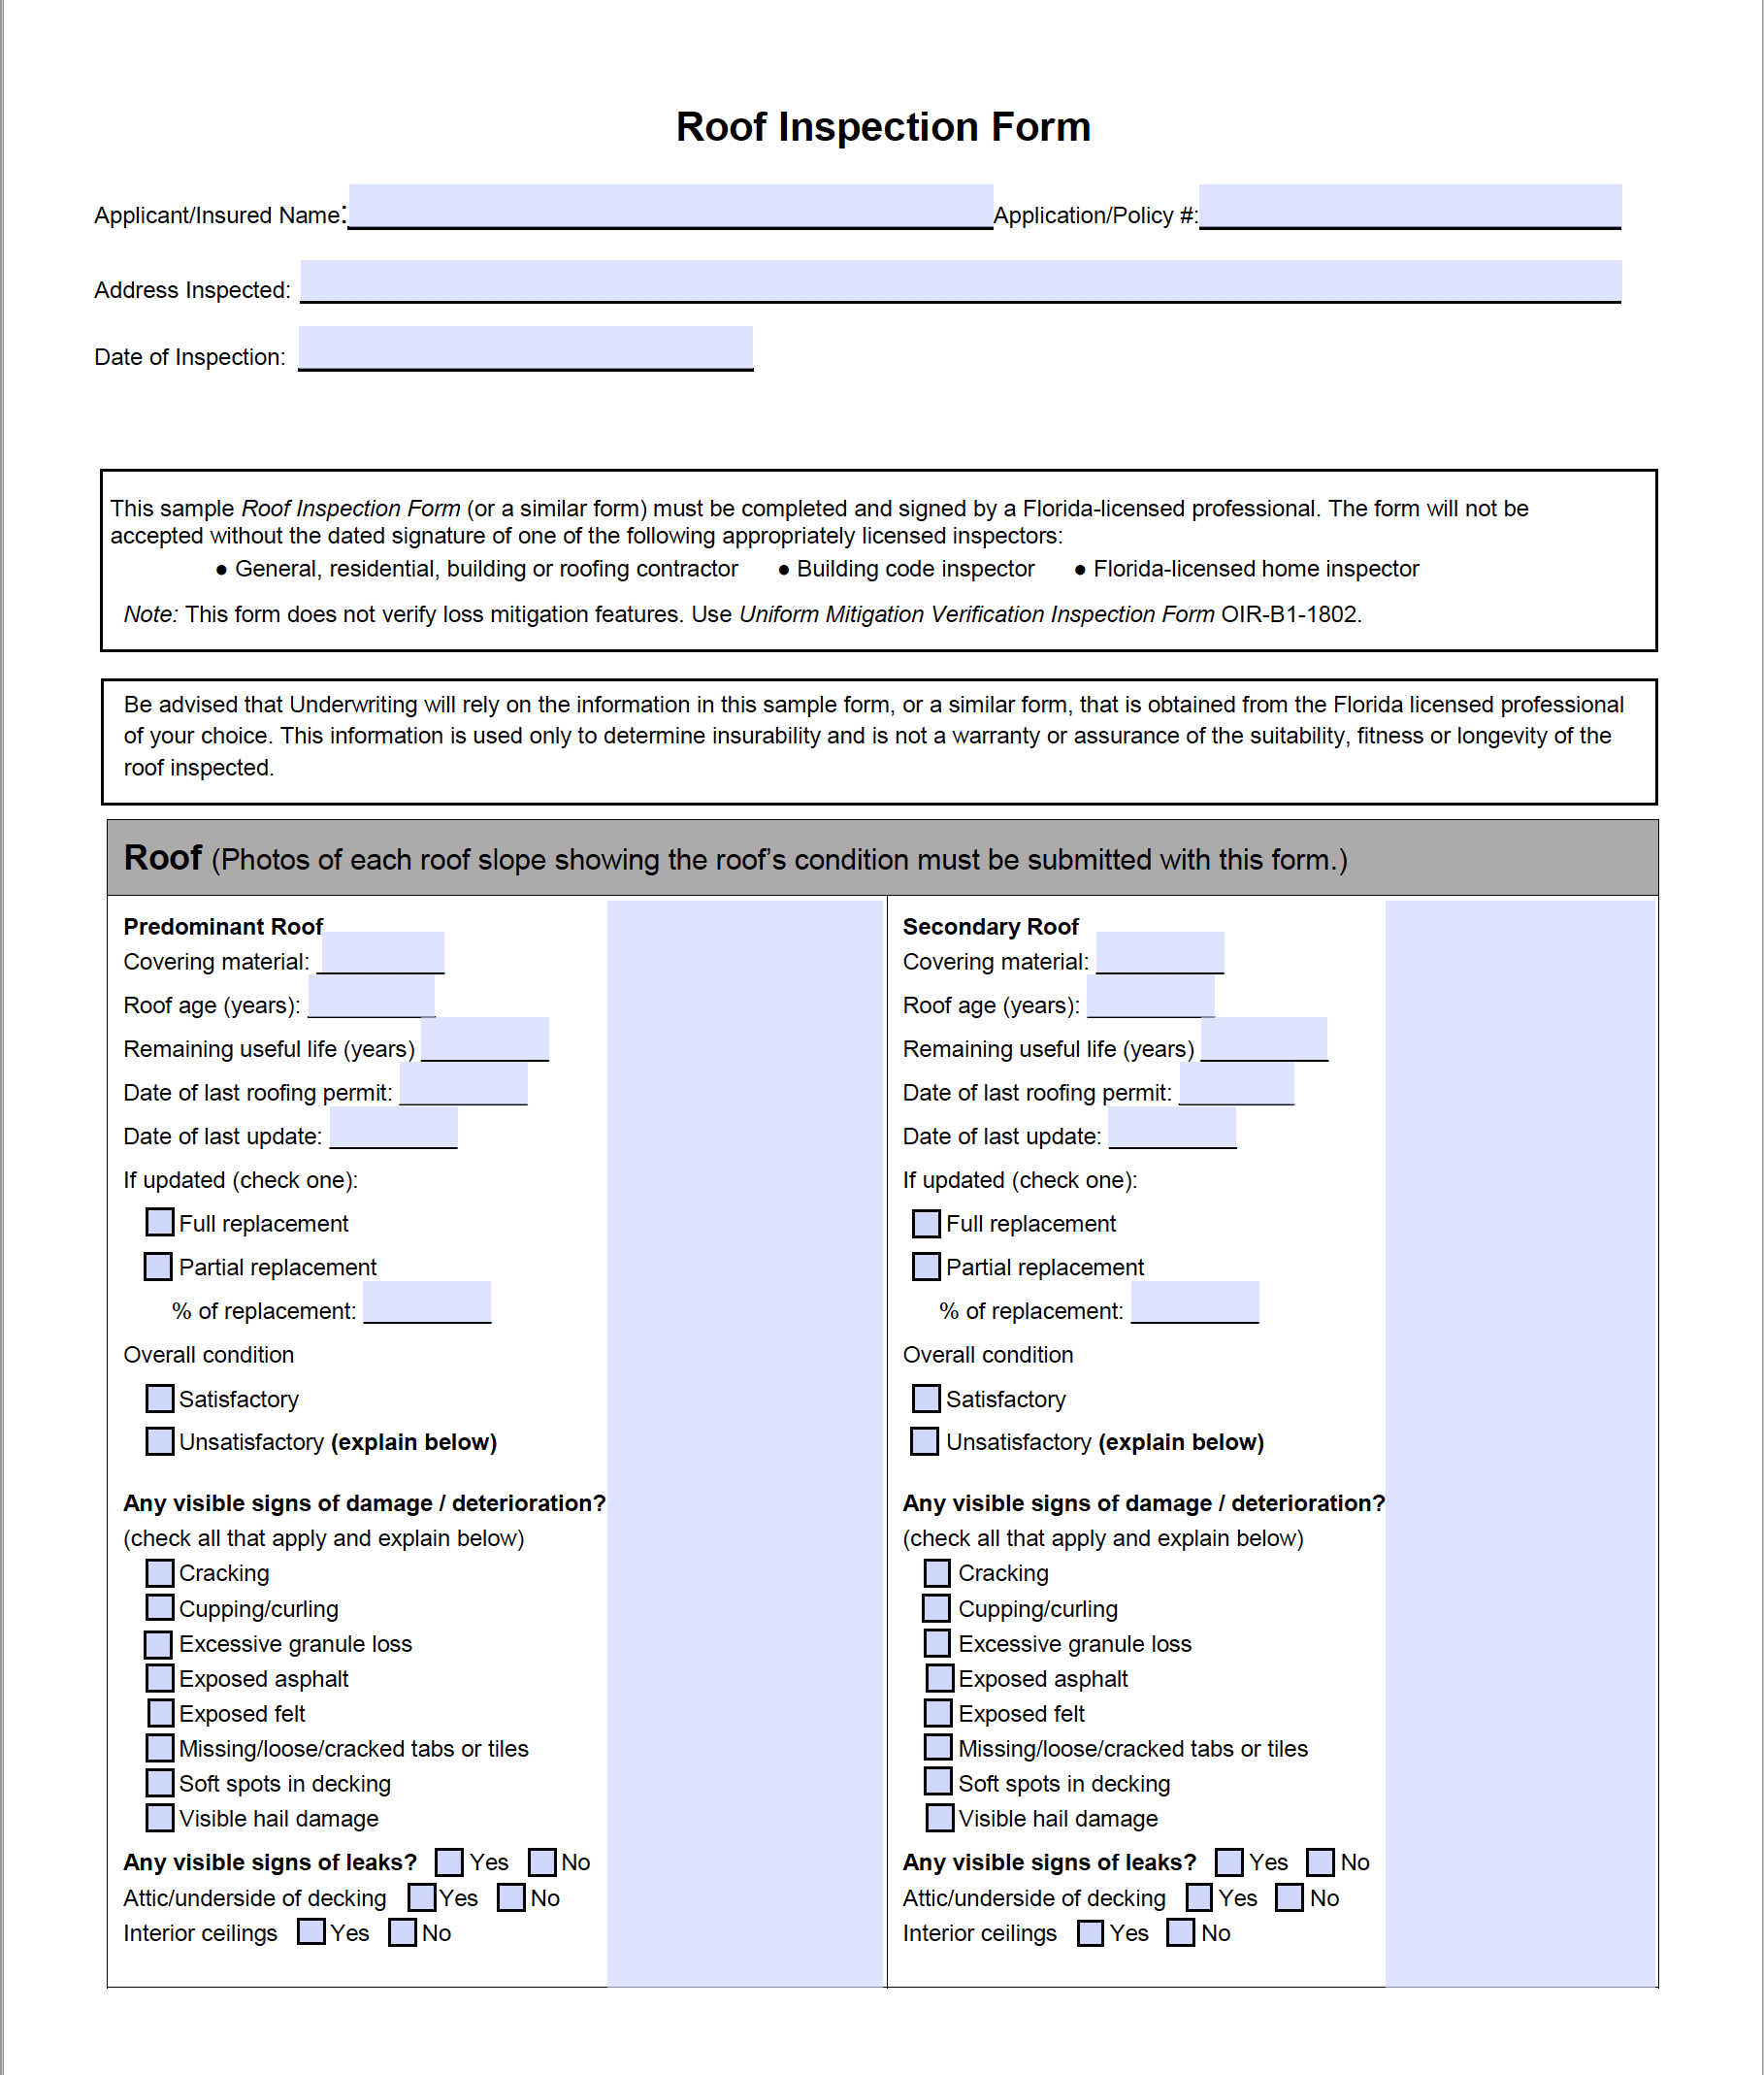 fillable-pdf-wind-mitigation-and-4-point-forms-inspection-forms